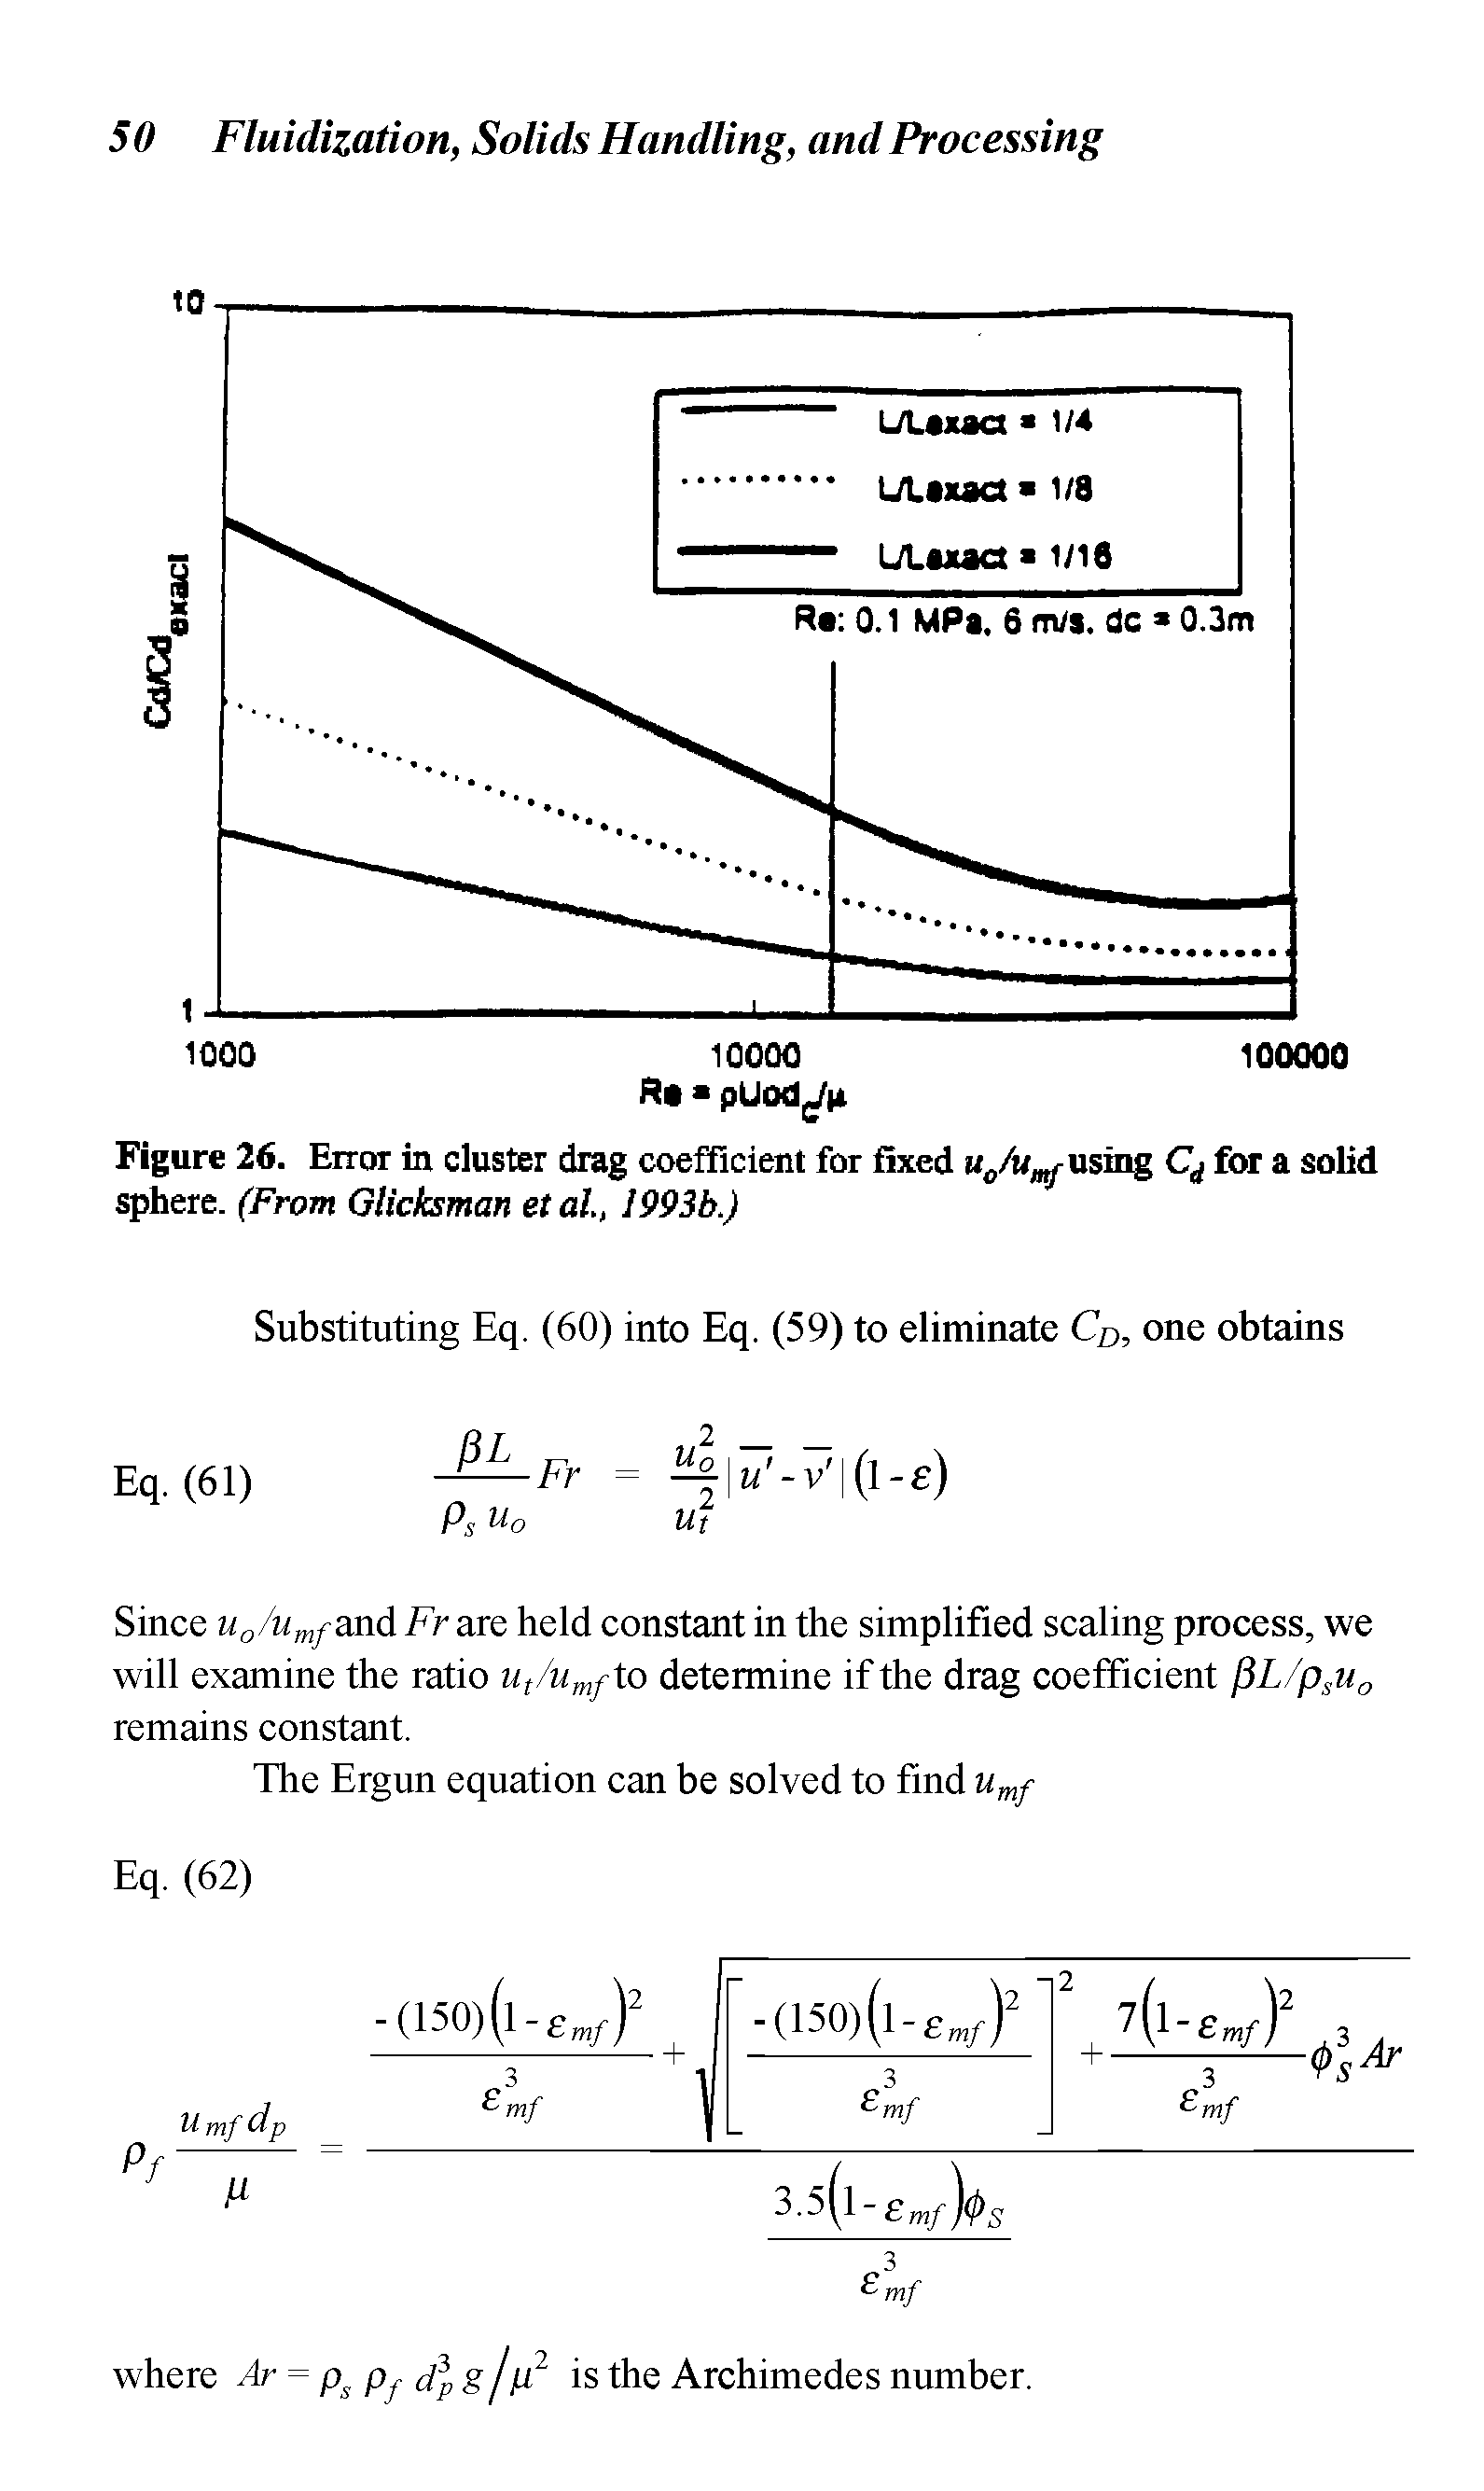 Figure 26. Error in cluster drag coefficient for fixed u0/u using Cd for a solid sphere. (From Glicksman et ah, 1993b.)...